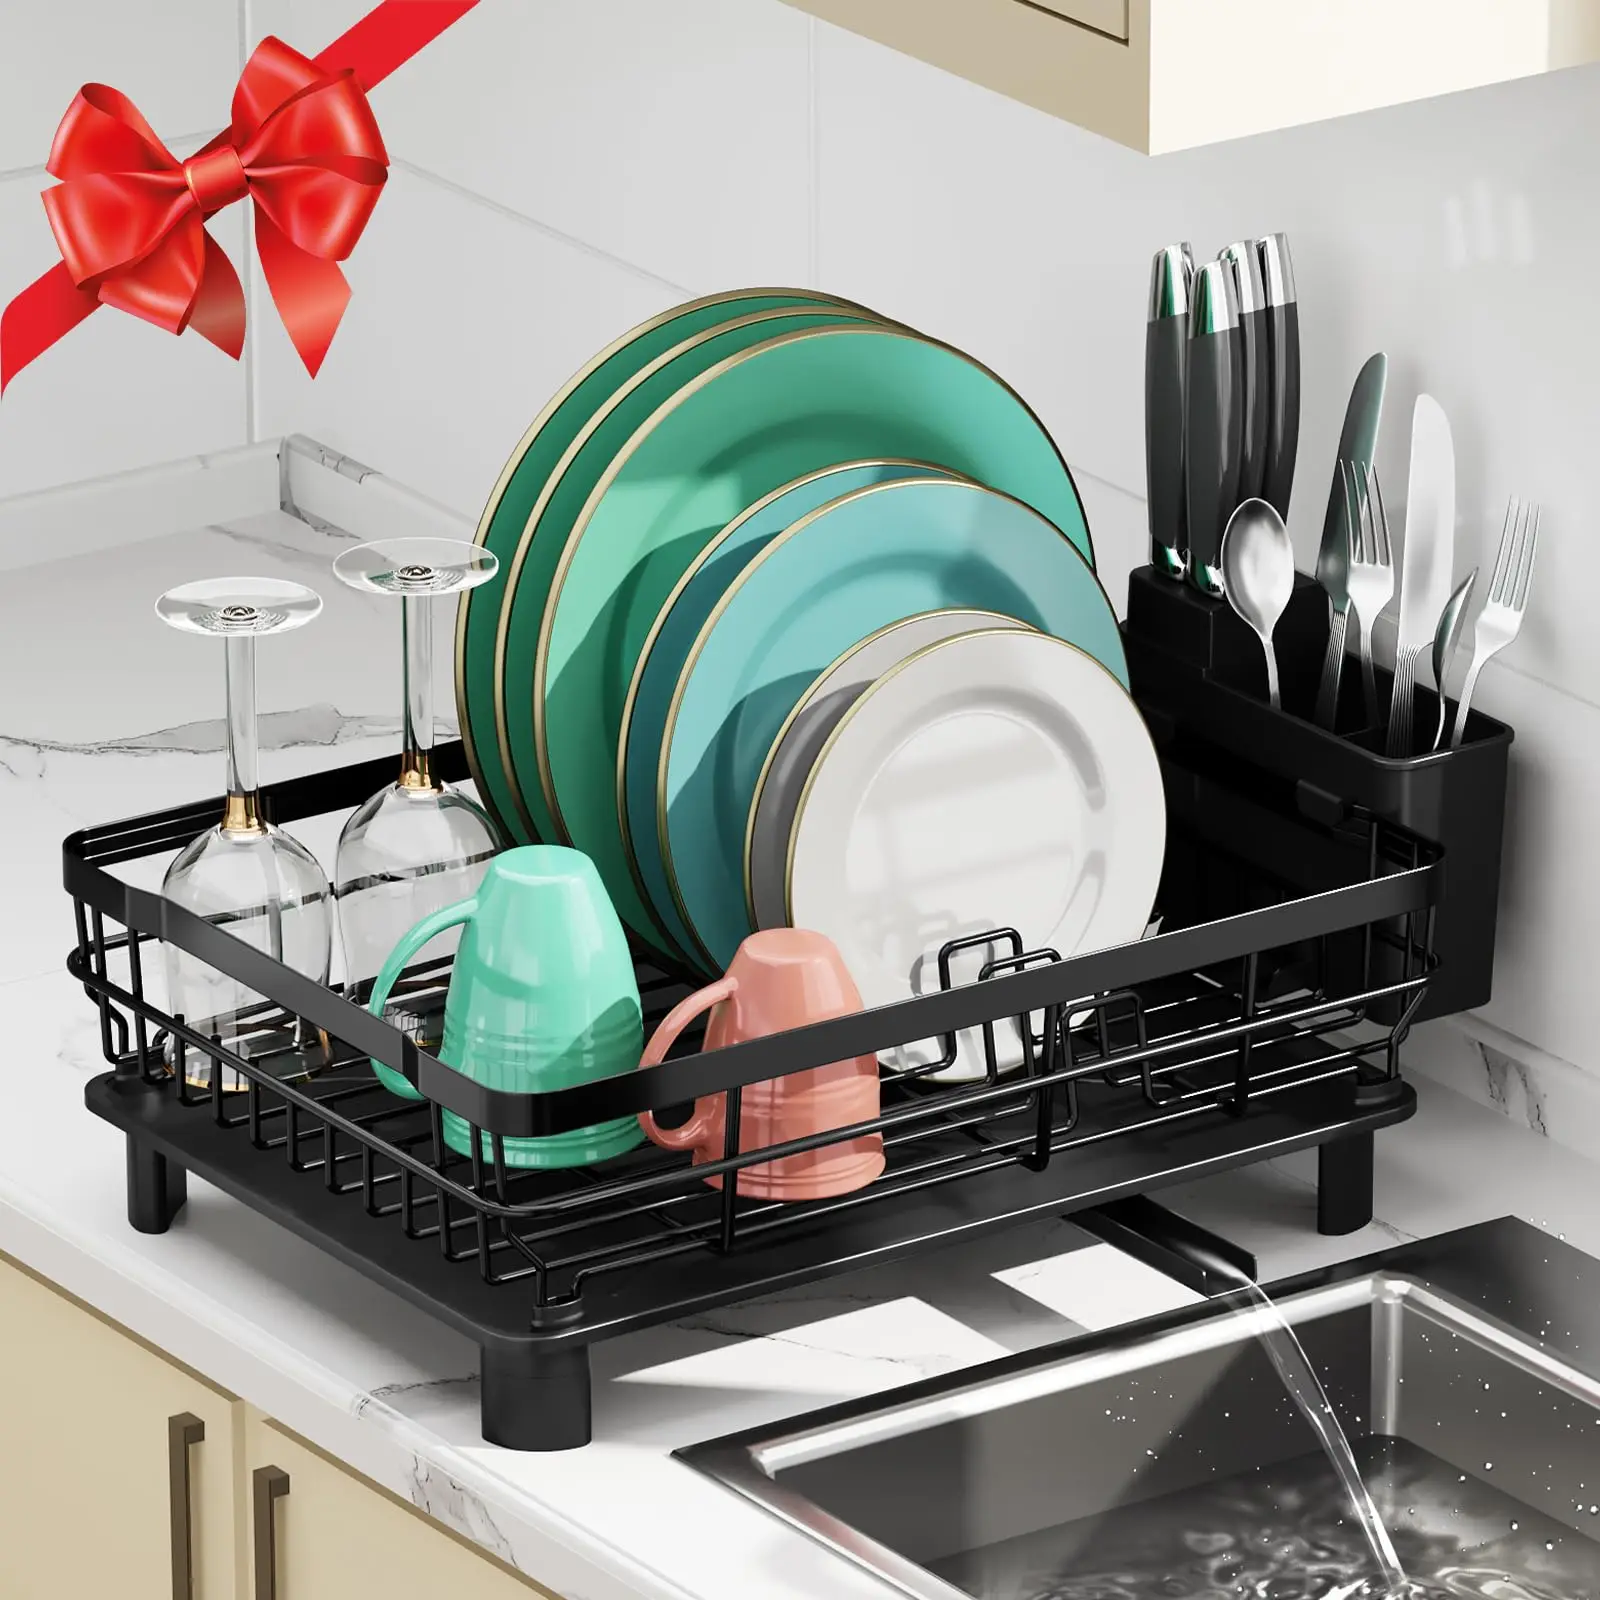 Hot Sales Drainboard Removable Utensil Holder Swivel Spout Metal Dish Drying Rack For Kitchen Counter